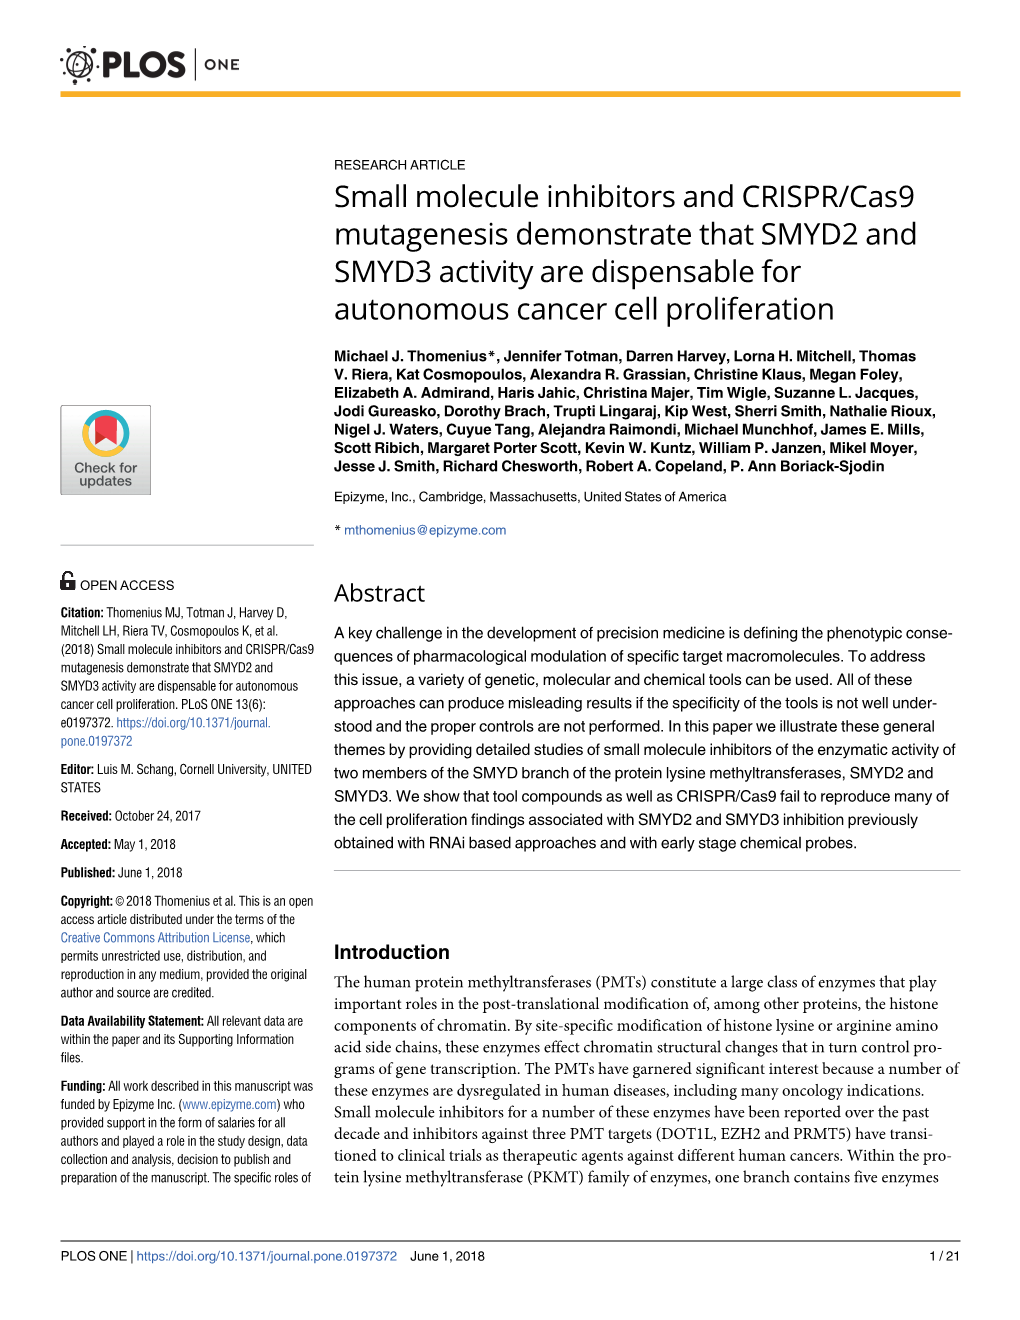 Small Molecule Inhibitors and CRISPR/Cas9 Mutagenesis Demonstrate That SMYD2 and SMYD3 Activity Are Dispensable for Autonomous Cancer Cell Proliferation